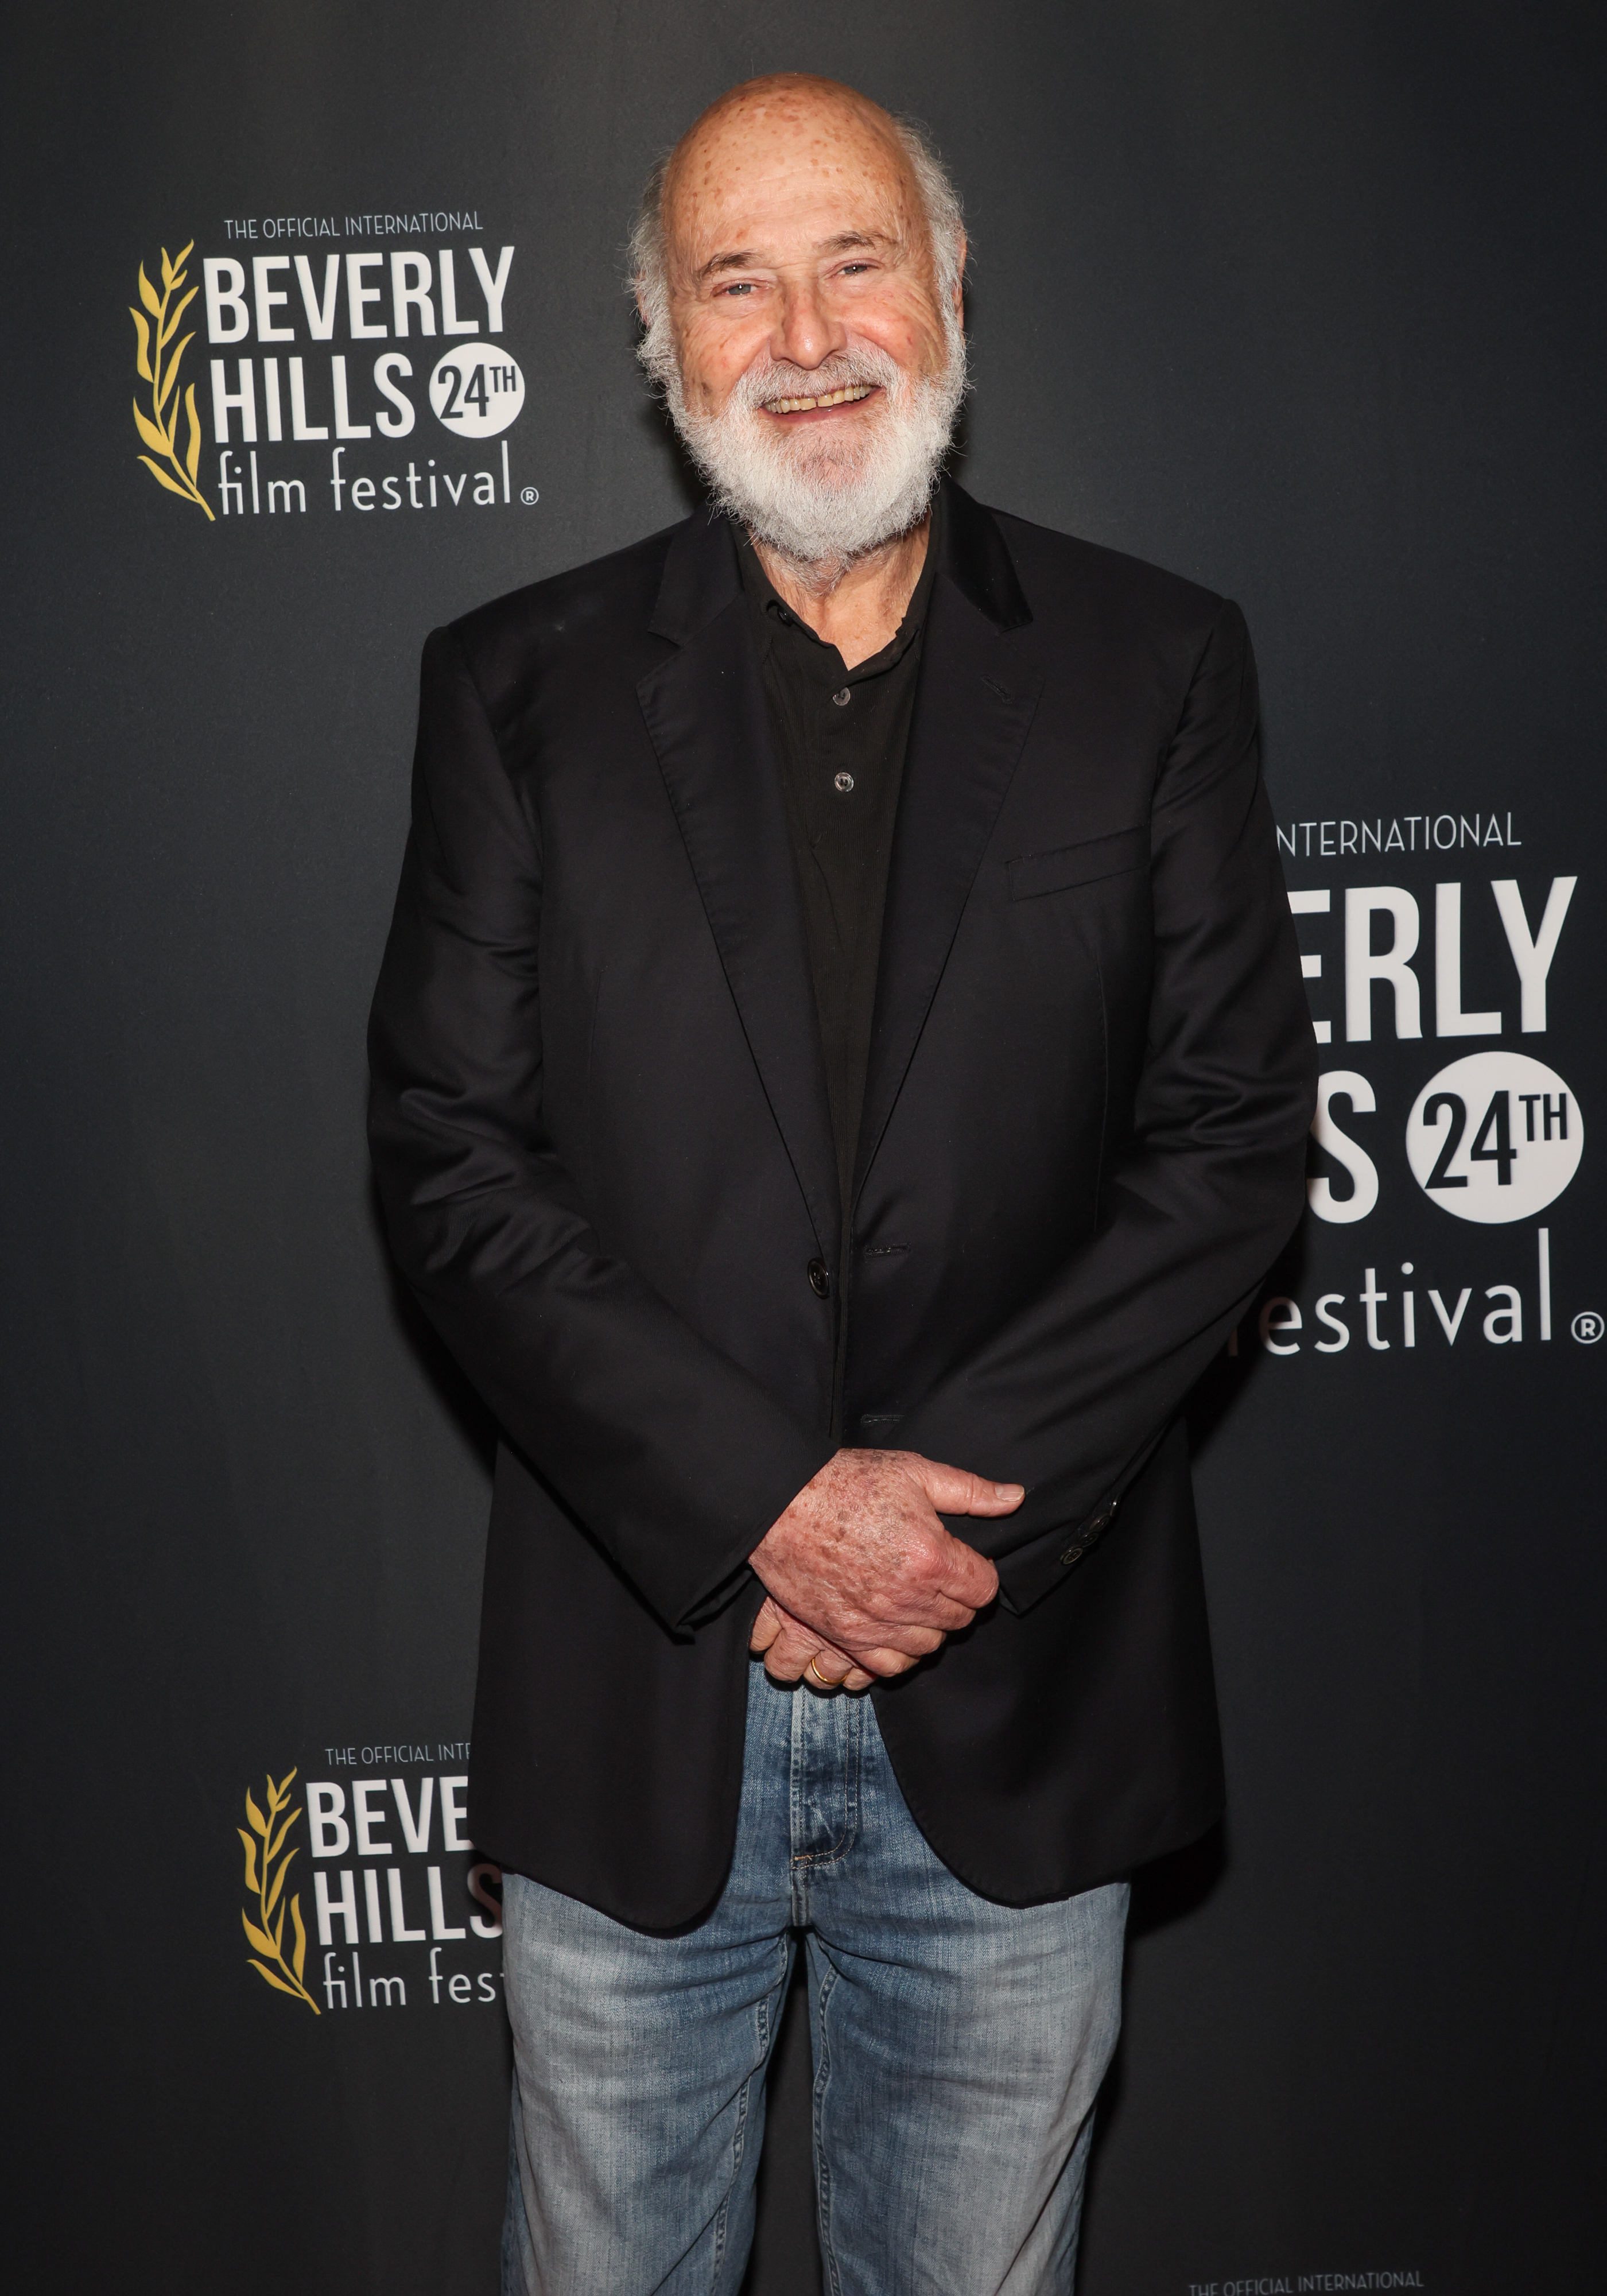 Rob Reiner smiles while posing in a dark blazer and jeans at the 24th Beverly Hills Film Festival